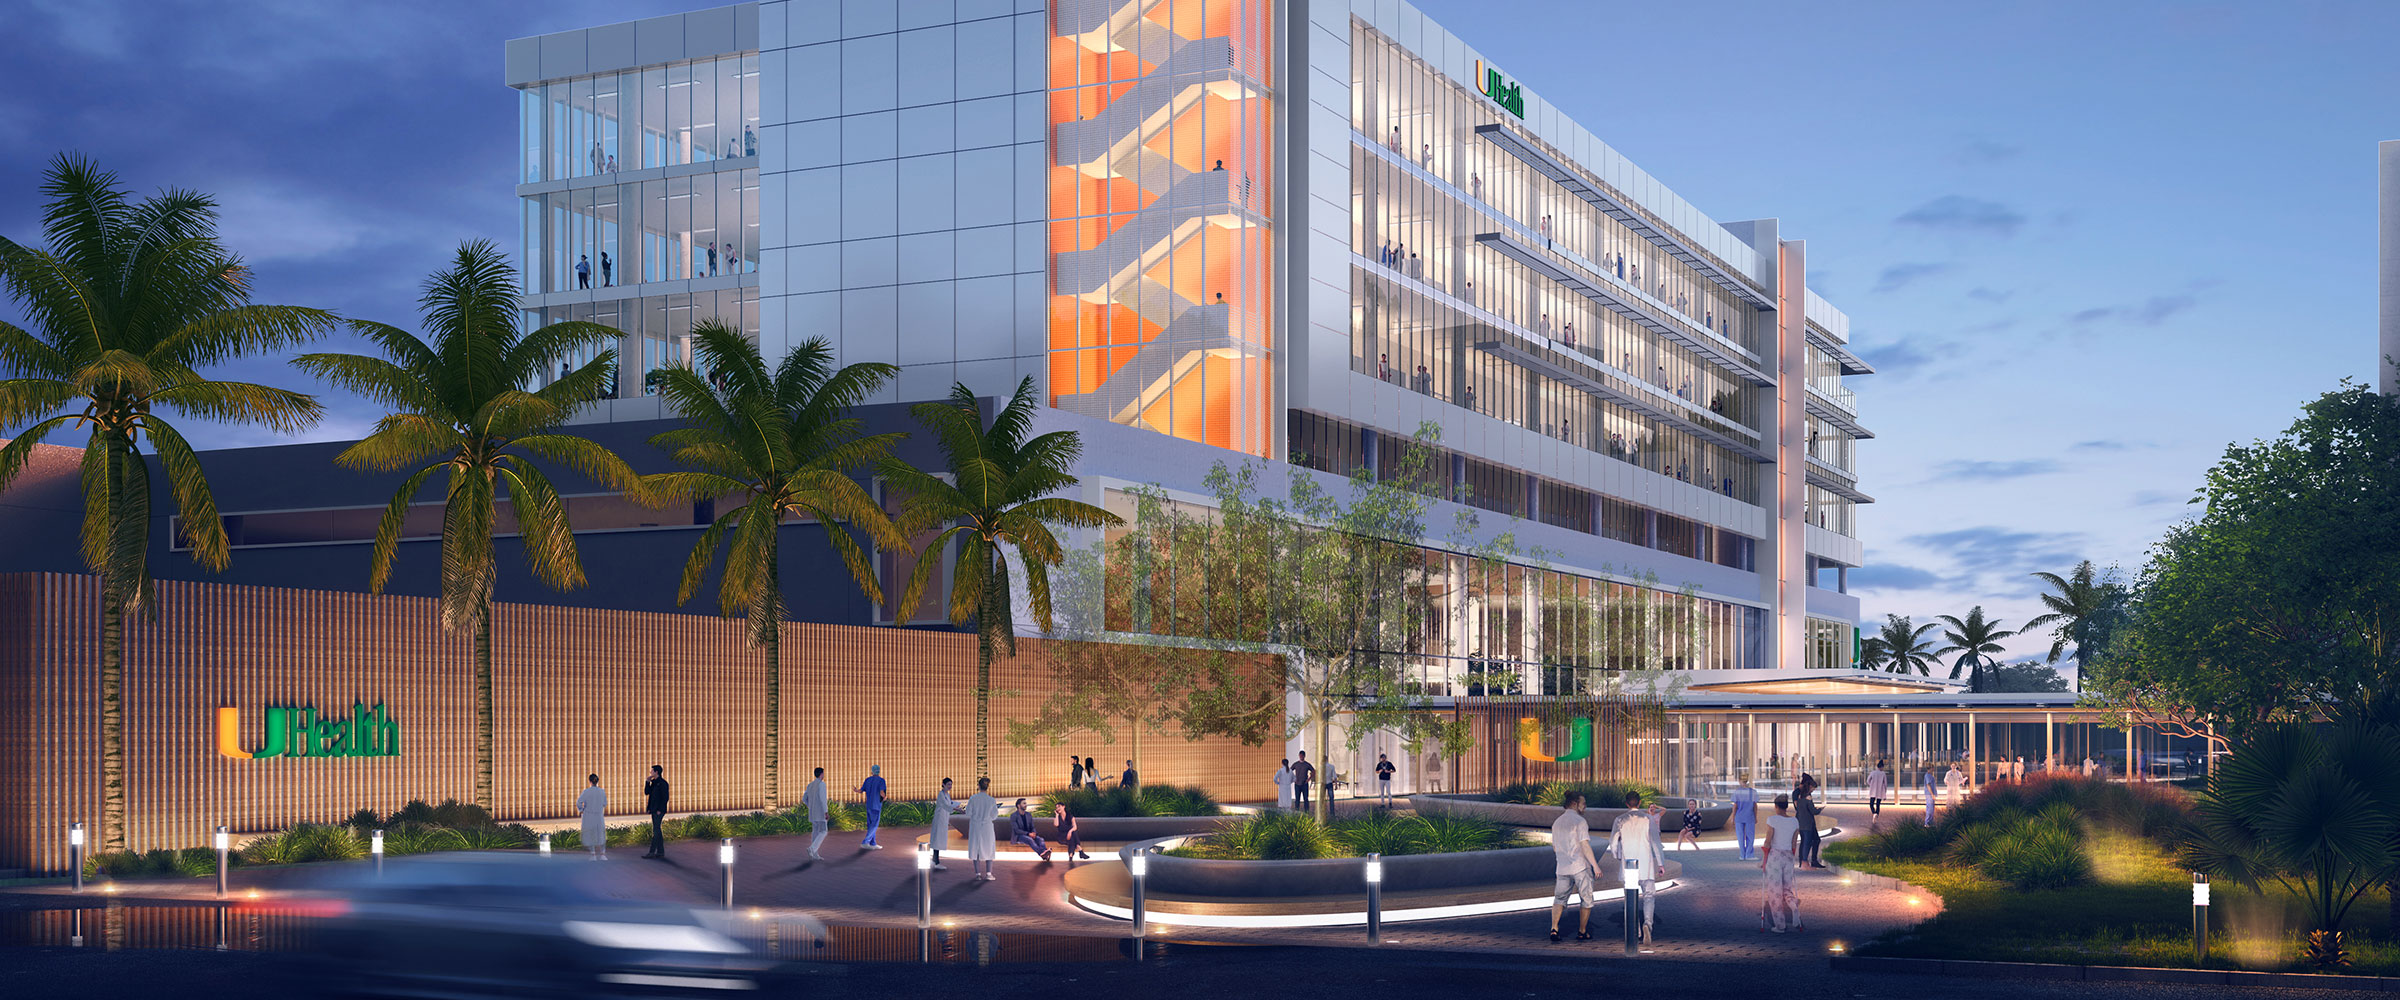 Paseo Architectural Rendering of UHealth at SoLé Mia in Aventura